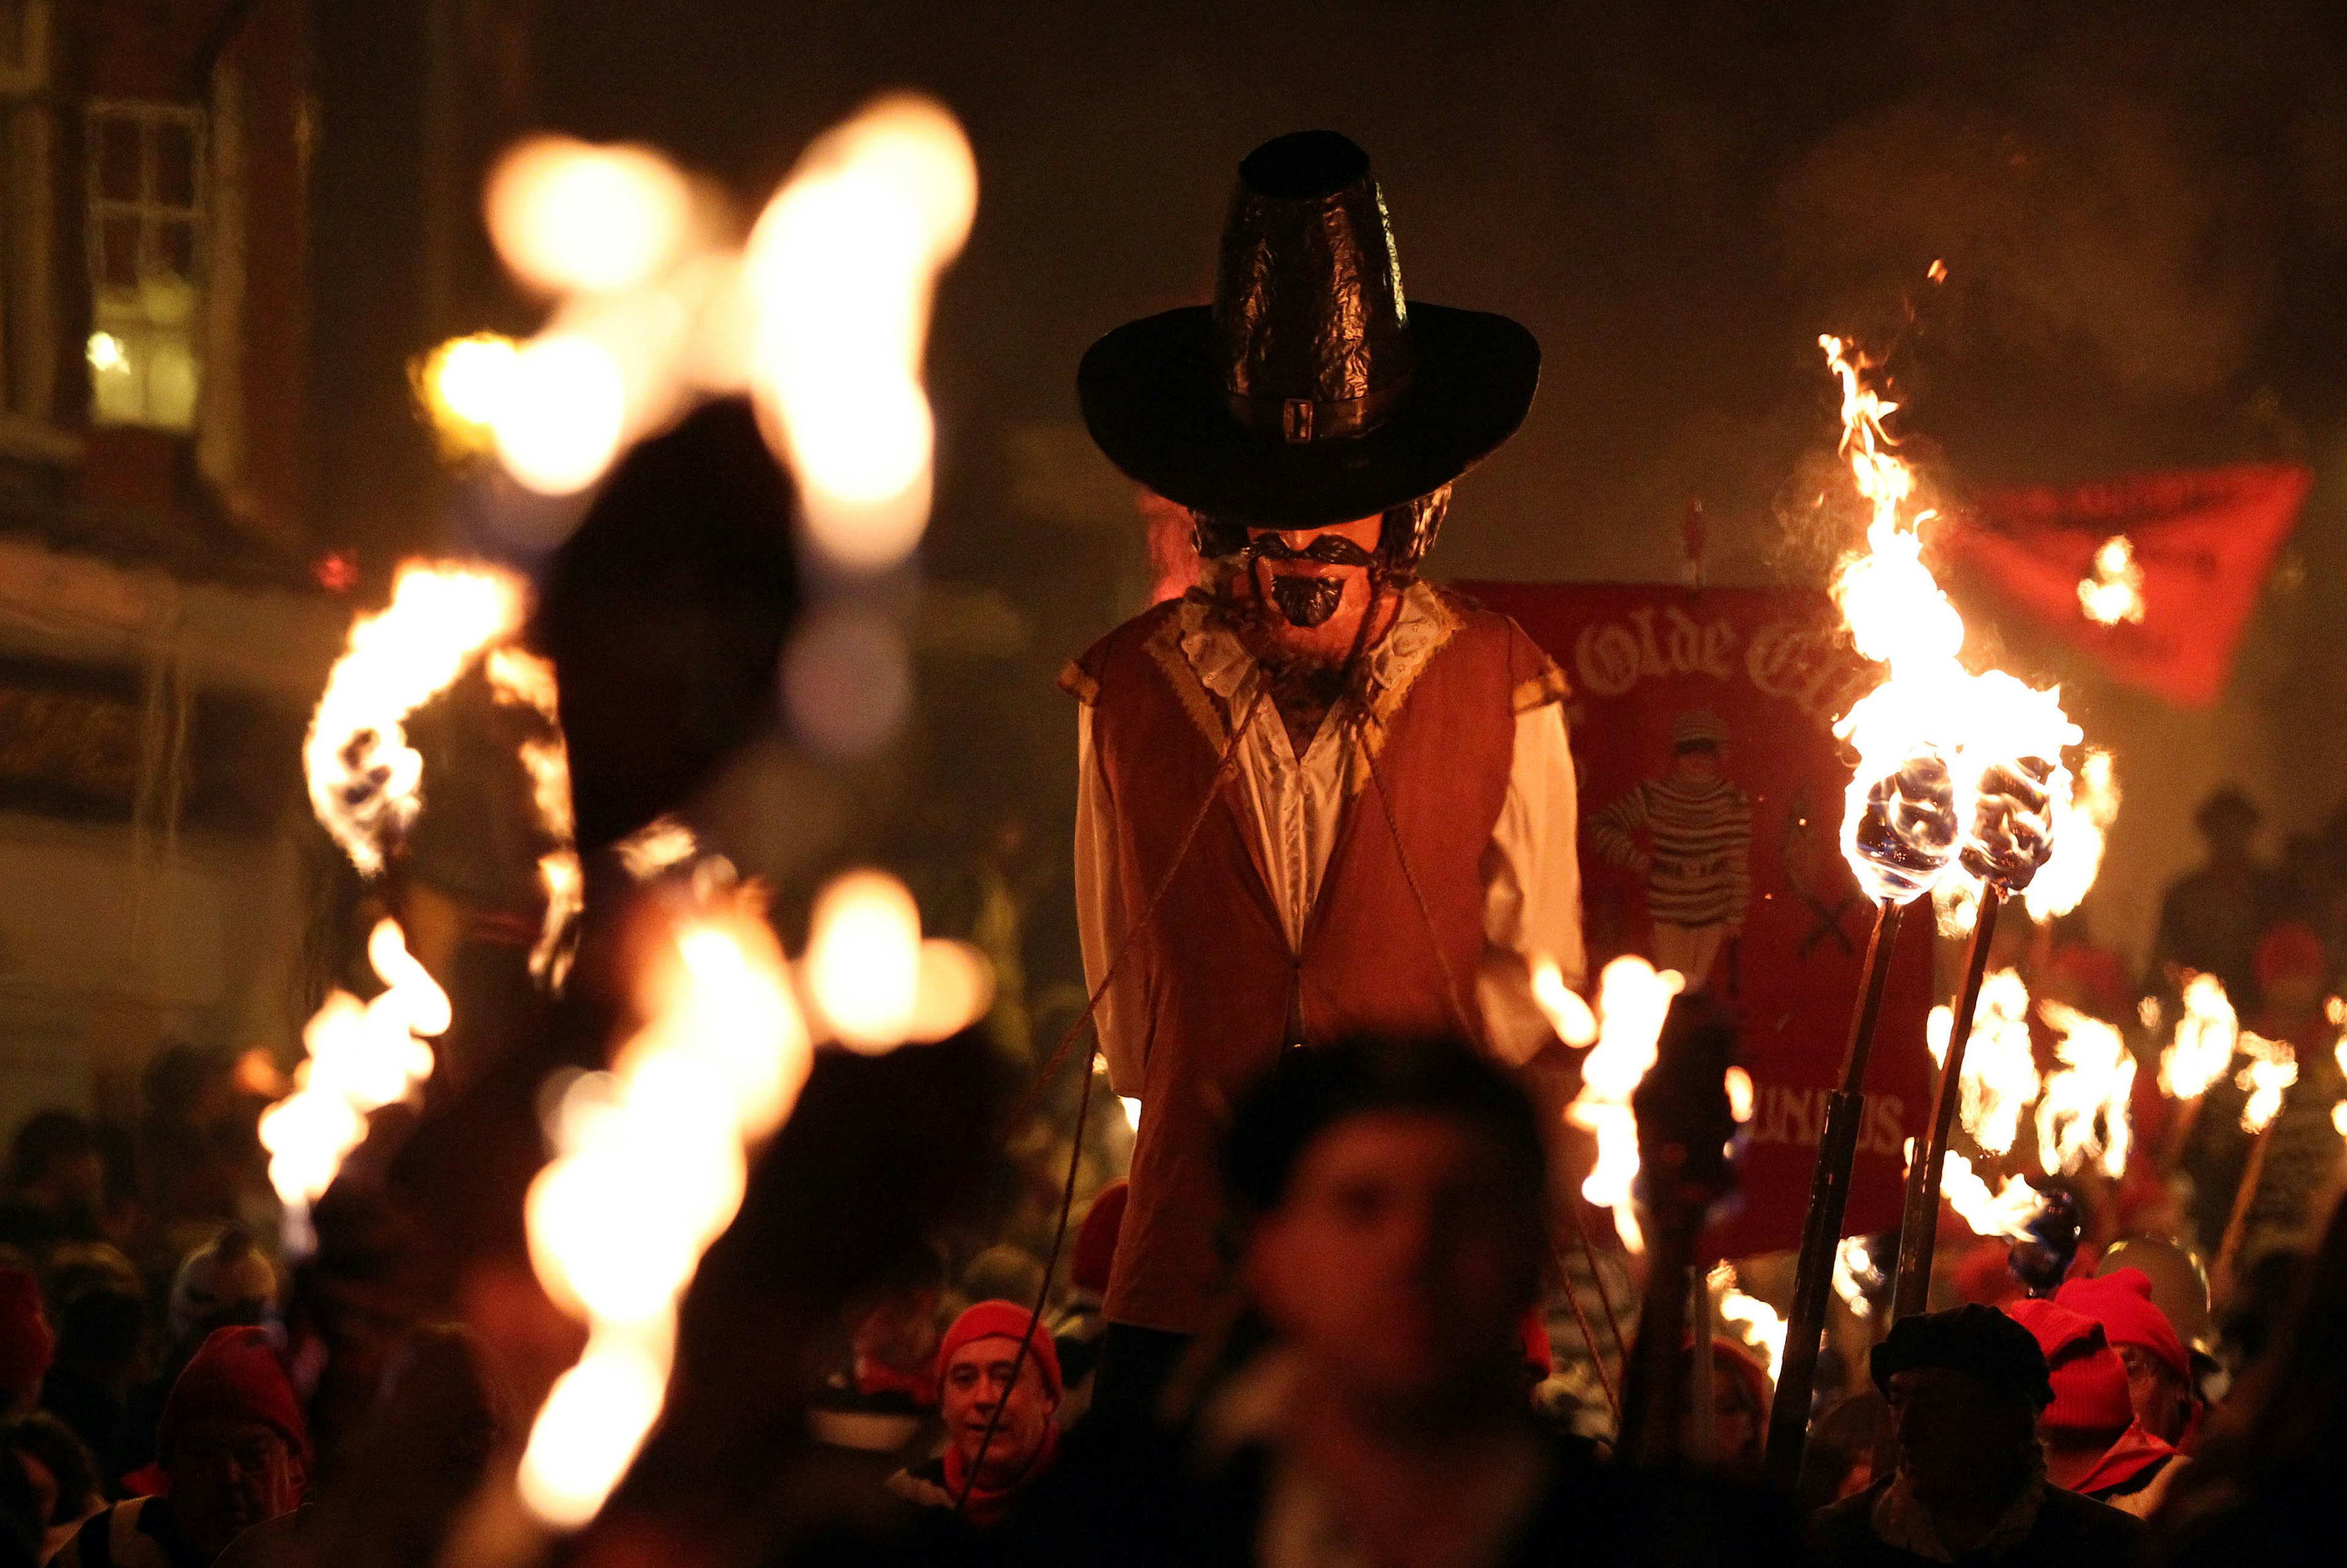 Lewes Bonfire Society's parade through Lewes, in East Sussex, as part of their bonfire night celebrations.   (Photo by Gareth Fuller/PA Images via Getty Images)